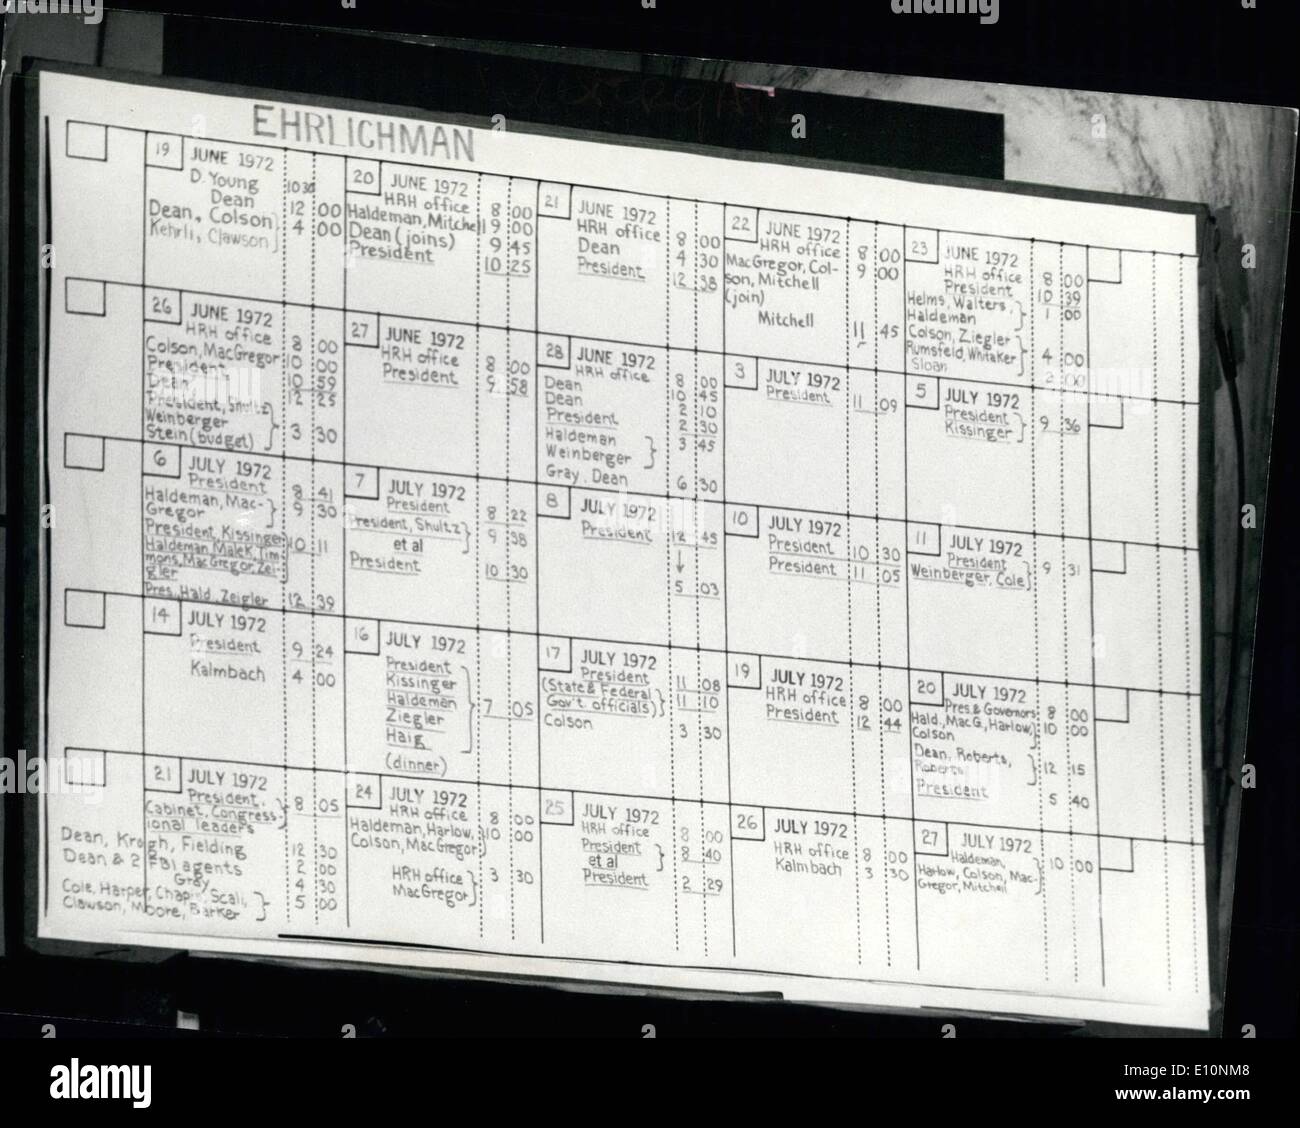 Jul. 07, 1973 - CONSOLIDATED NEWS PICTURES Ehrlichman's Appointment Log. Washington, D.C. 7/25/73..Photo above shows the Appointment calander of former Presidential Advisor John Ehrlichman at the Watergate hearings today.. The calander shows meetings with President Nixon and other figures that have at one time or another testified before the committee Ehrlichman defends the breakin of Daniel Ellsbergs psychiatrist's office as legal for National Security reasons but denied that the knew of the breaking and entering. Stock Photo